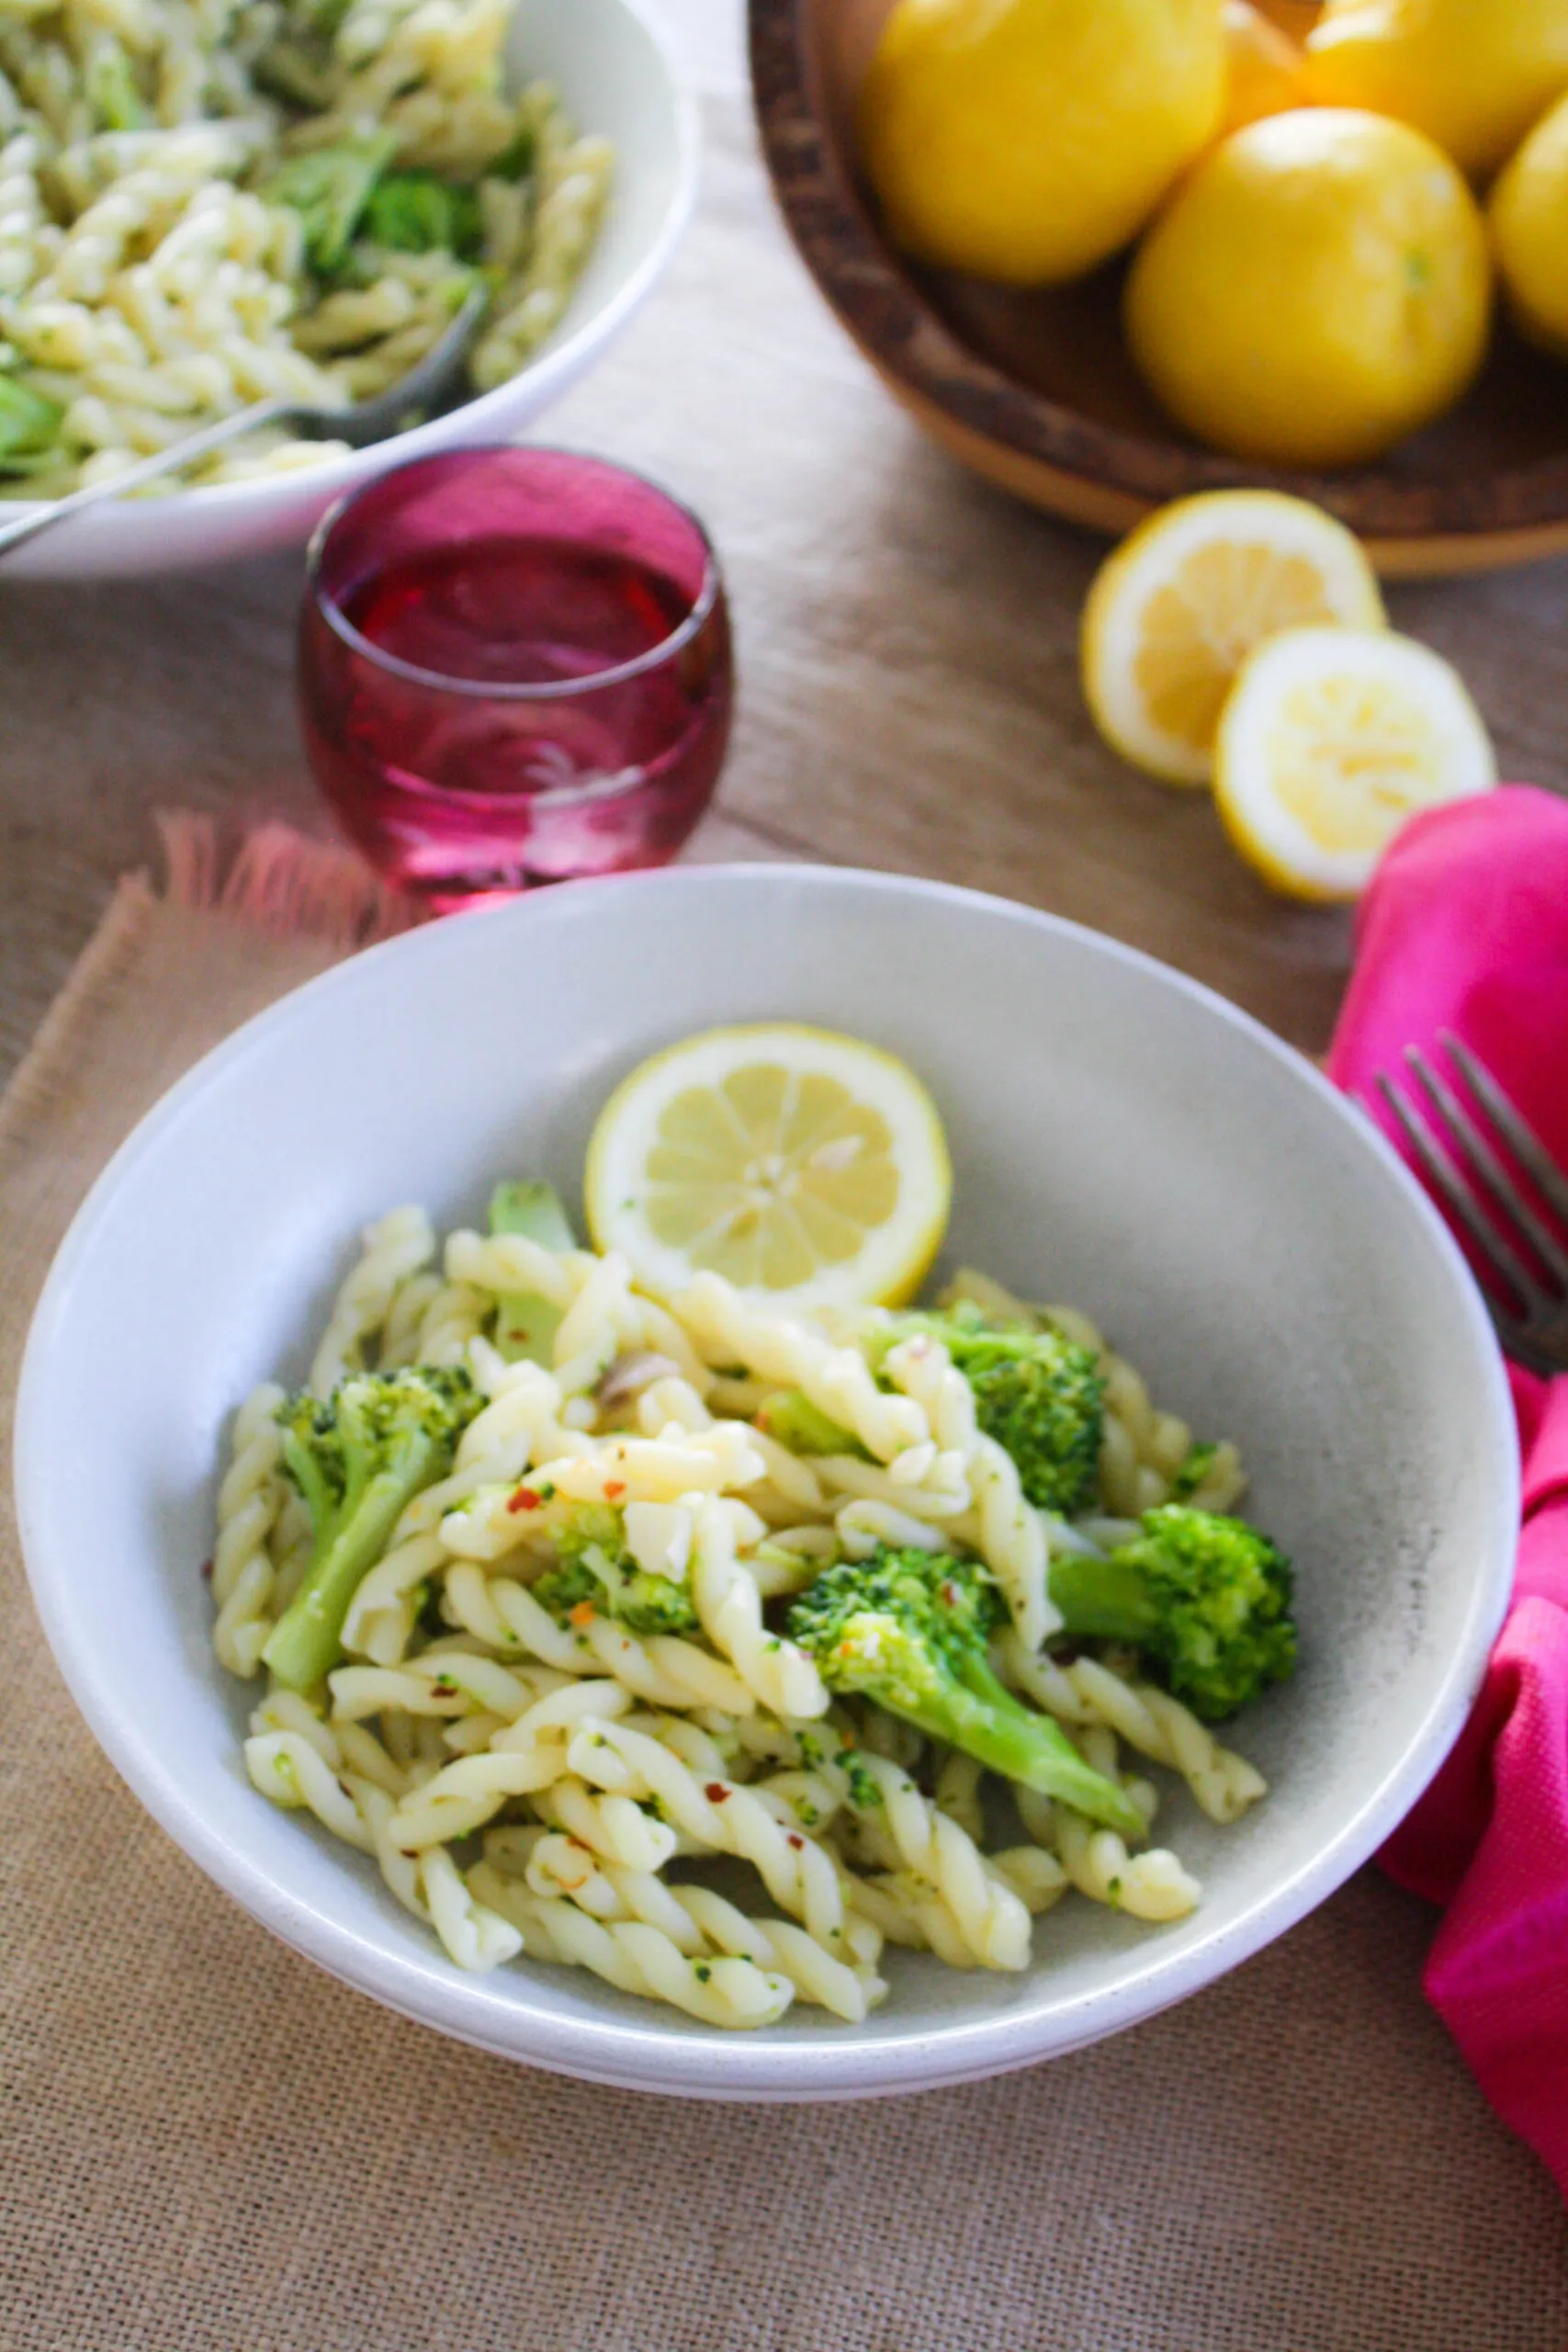 A table with a bowl of spiral pasta and broccoli florets mixed in with a red glass, pink napkin, and lemon slices.